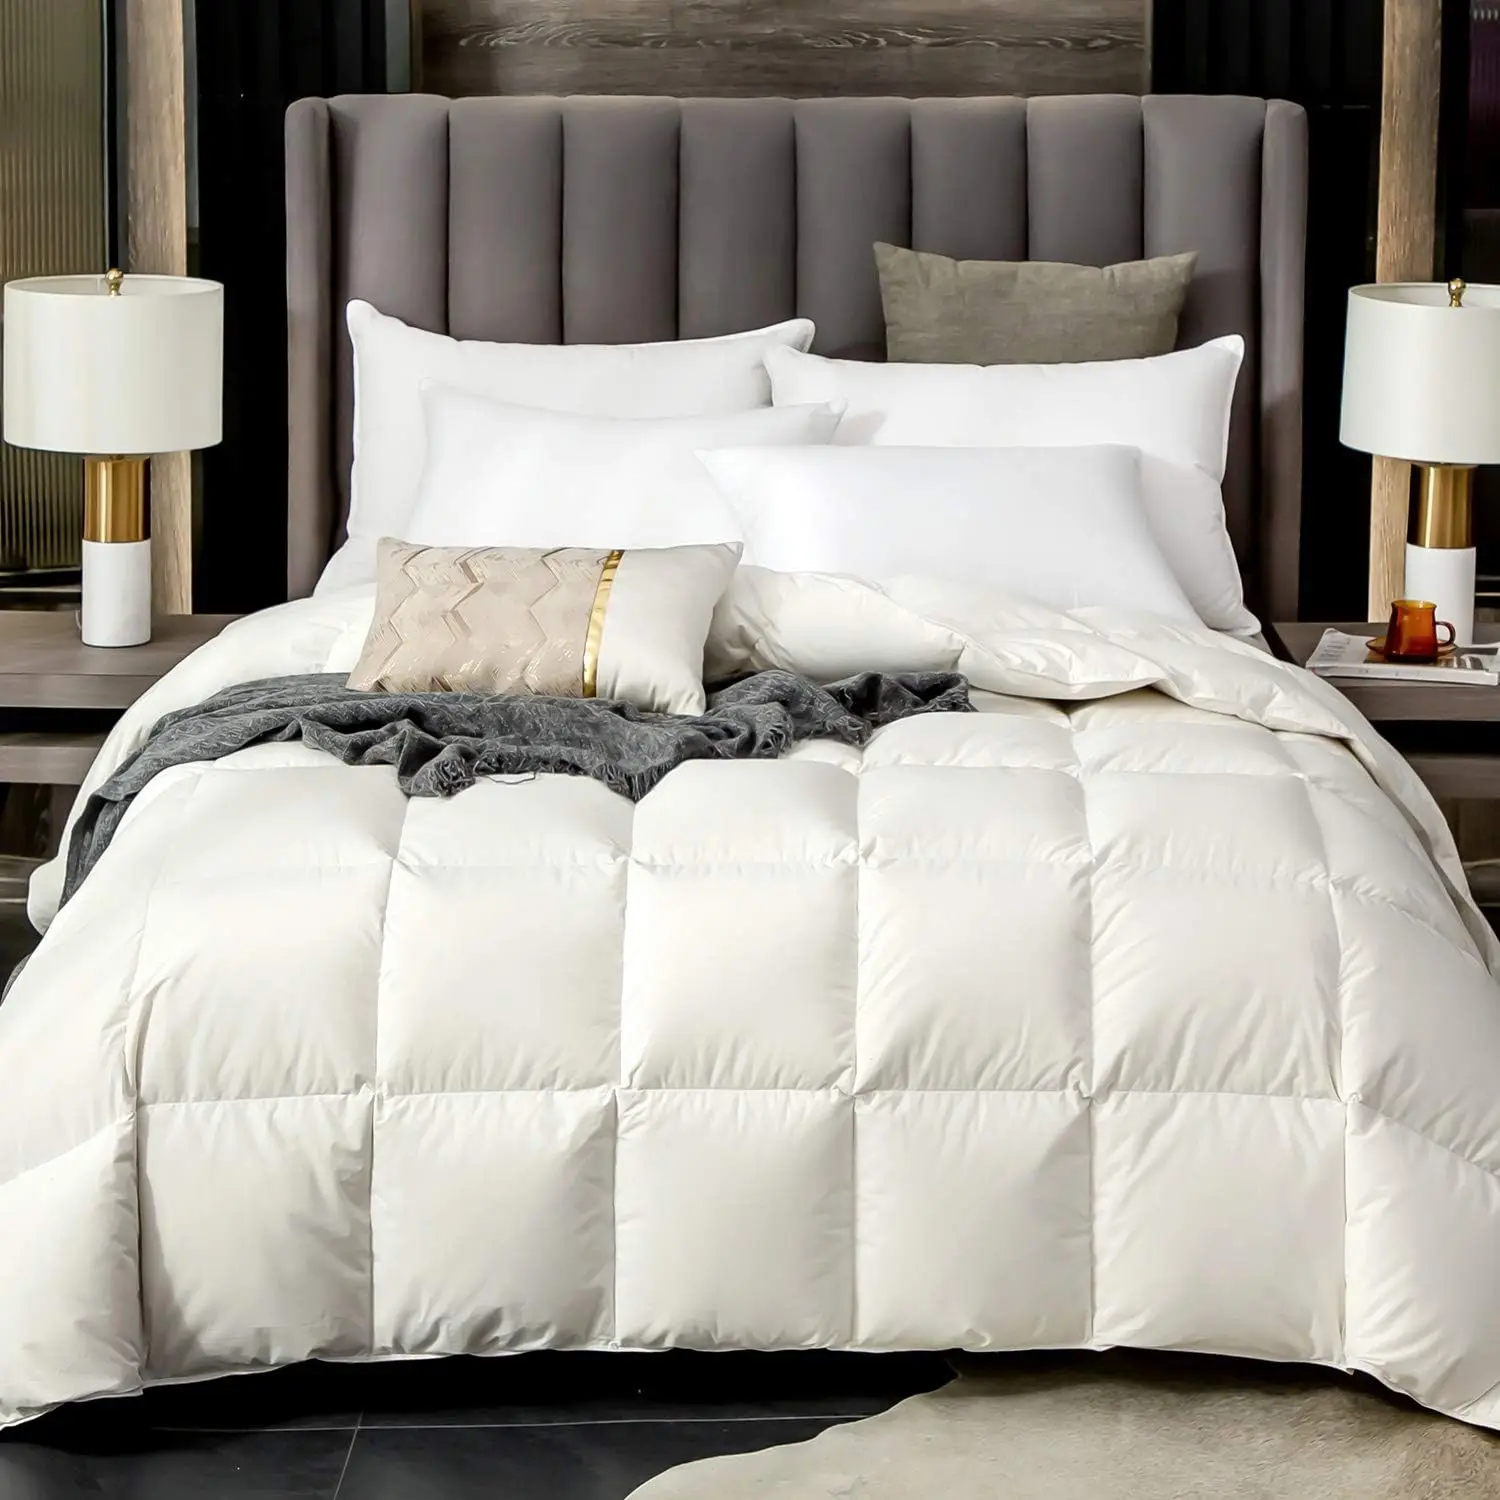 

Royoliving Luxurious Goose Down Comforter White All Season King Size Duvet Insert 100% Cotton Cover Down Proof Quilt